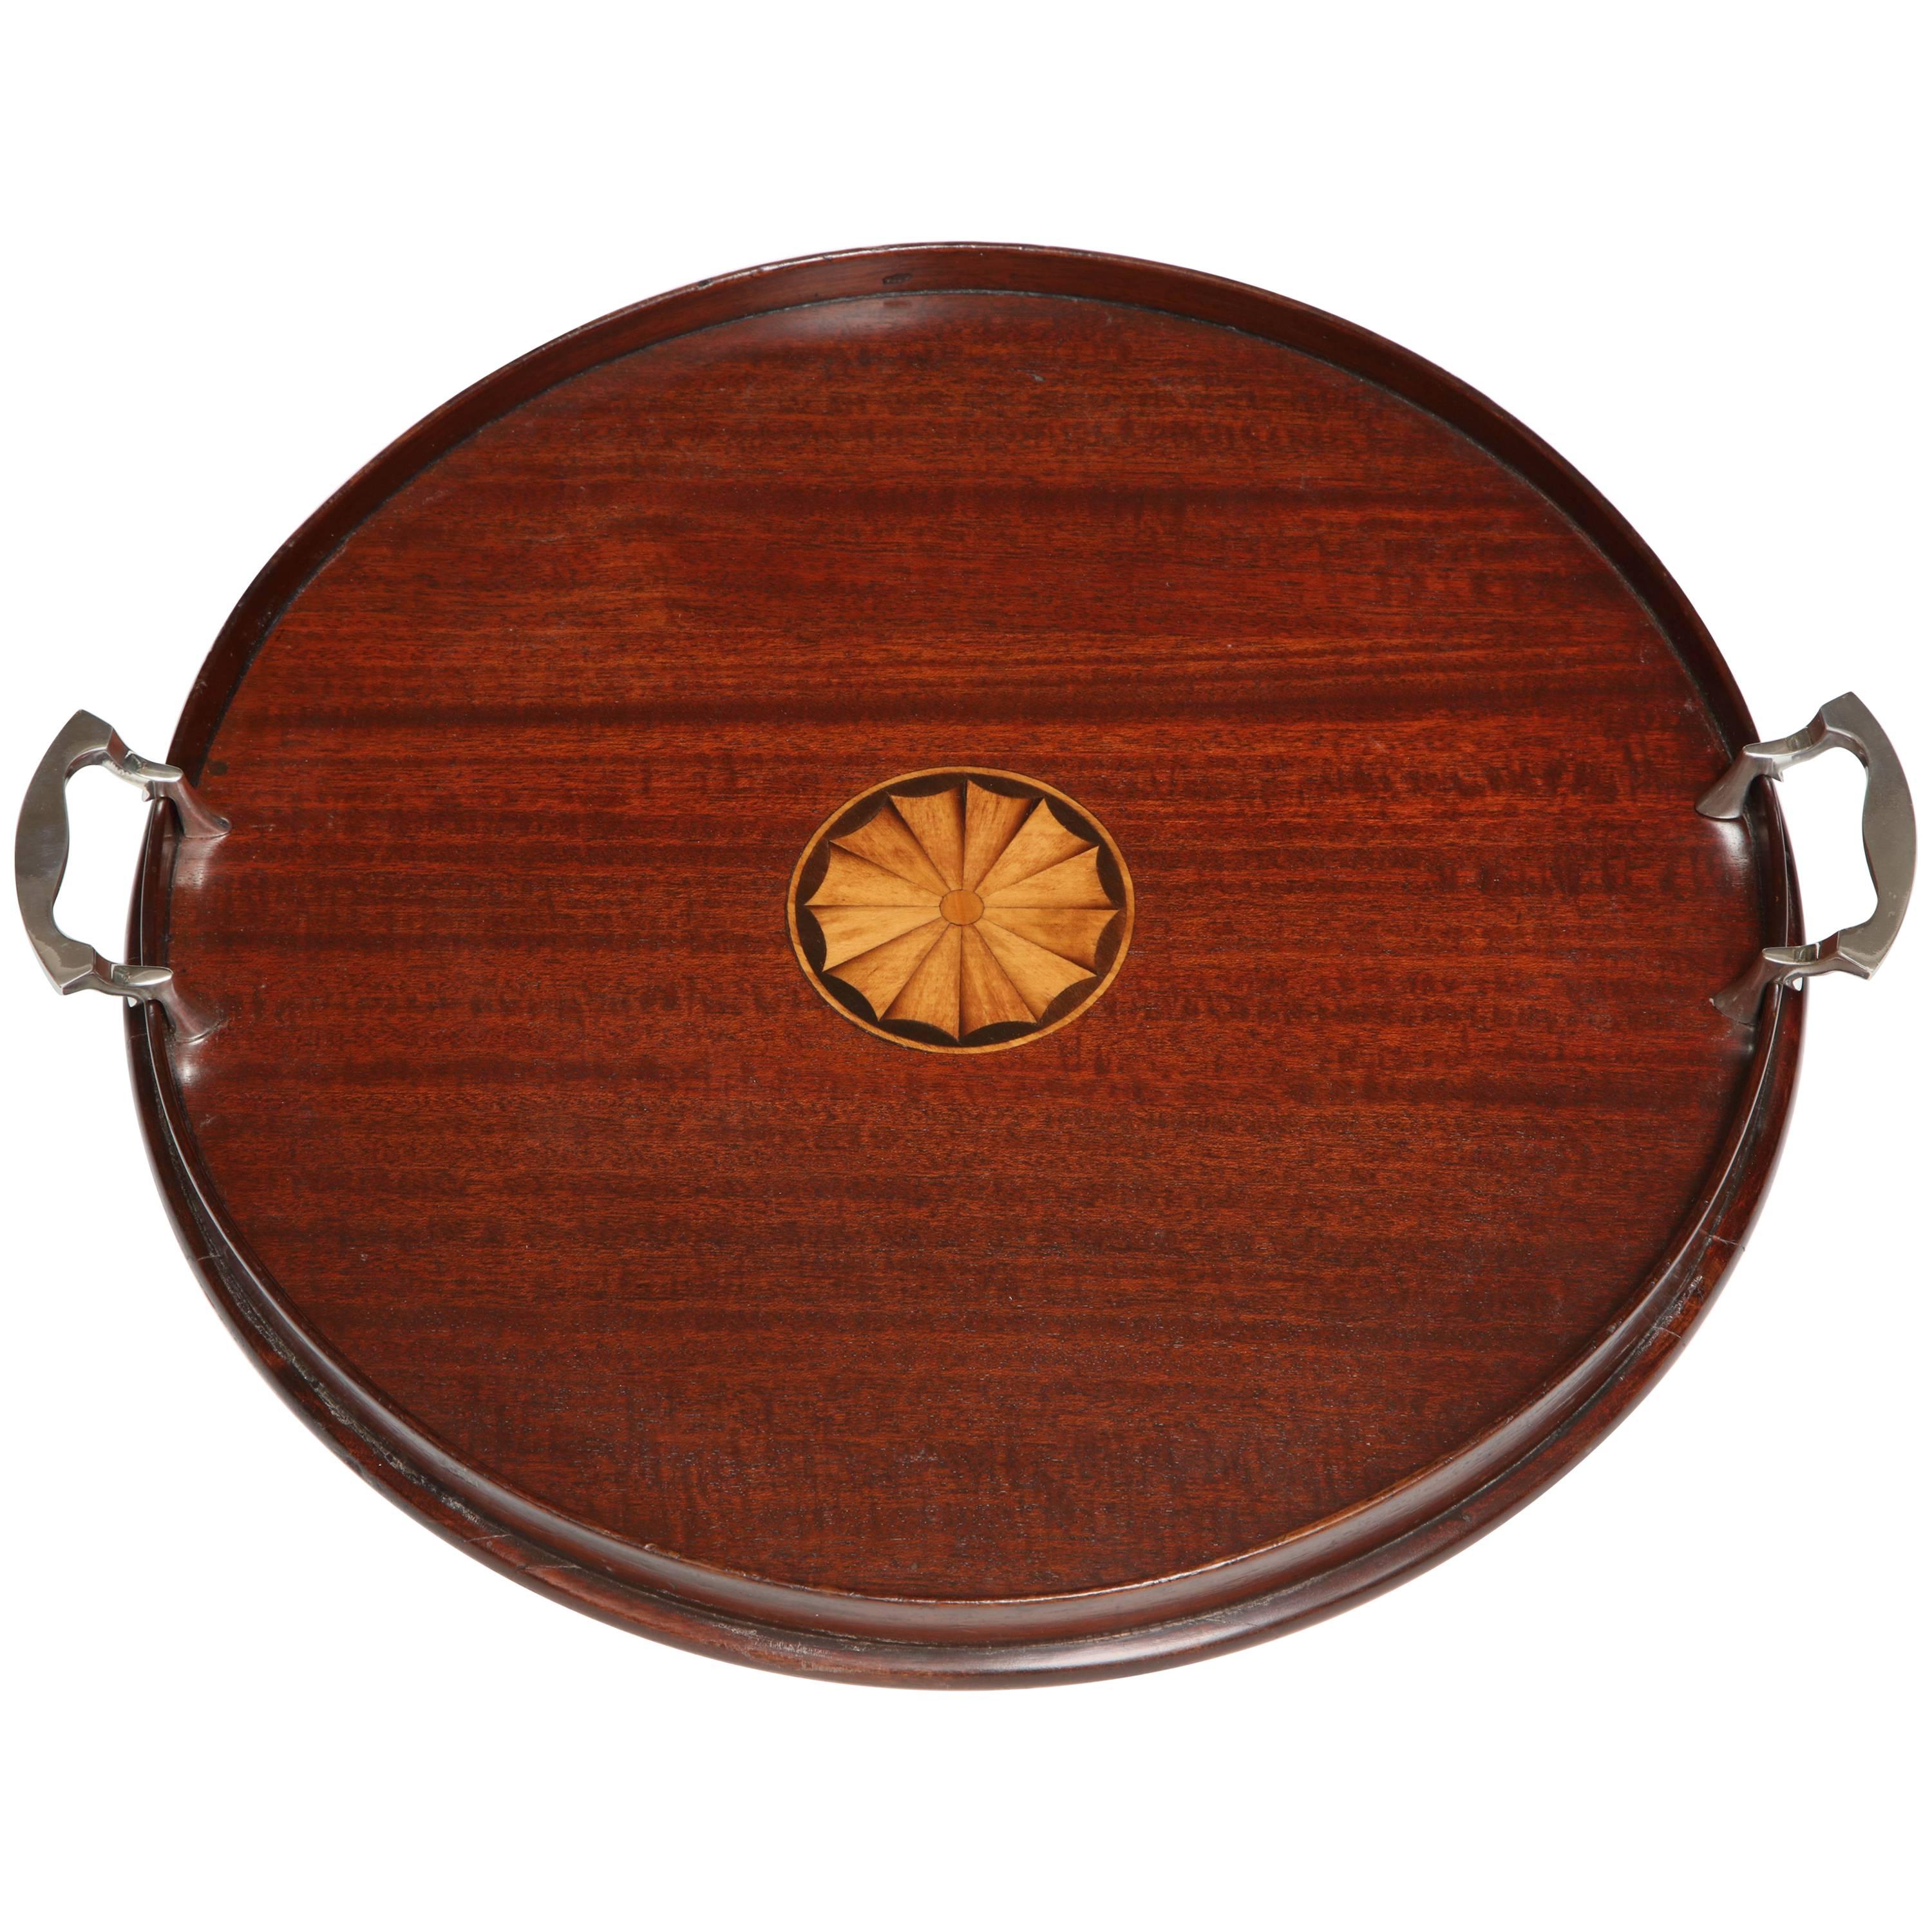 Edwardian Sheraton-Style Round Wood Serving Tray with Silver Plated Handles